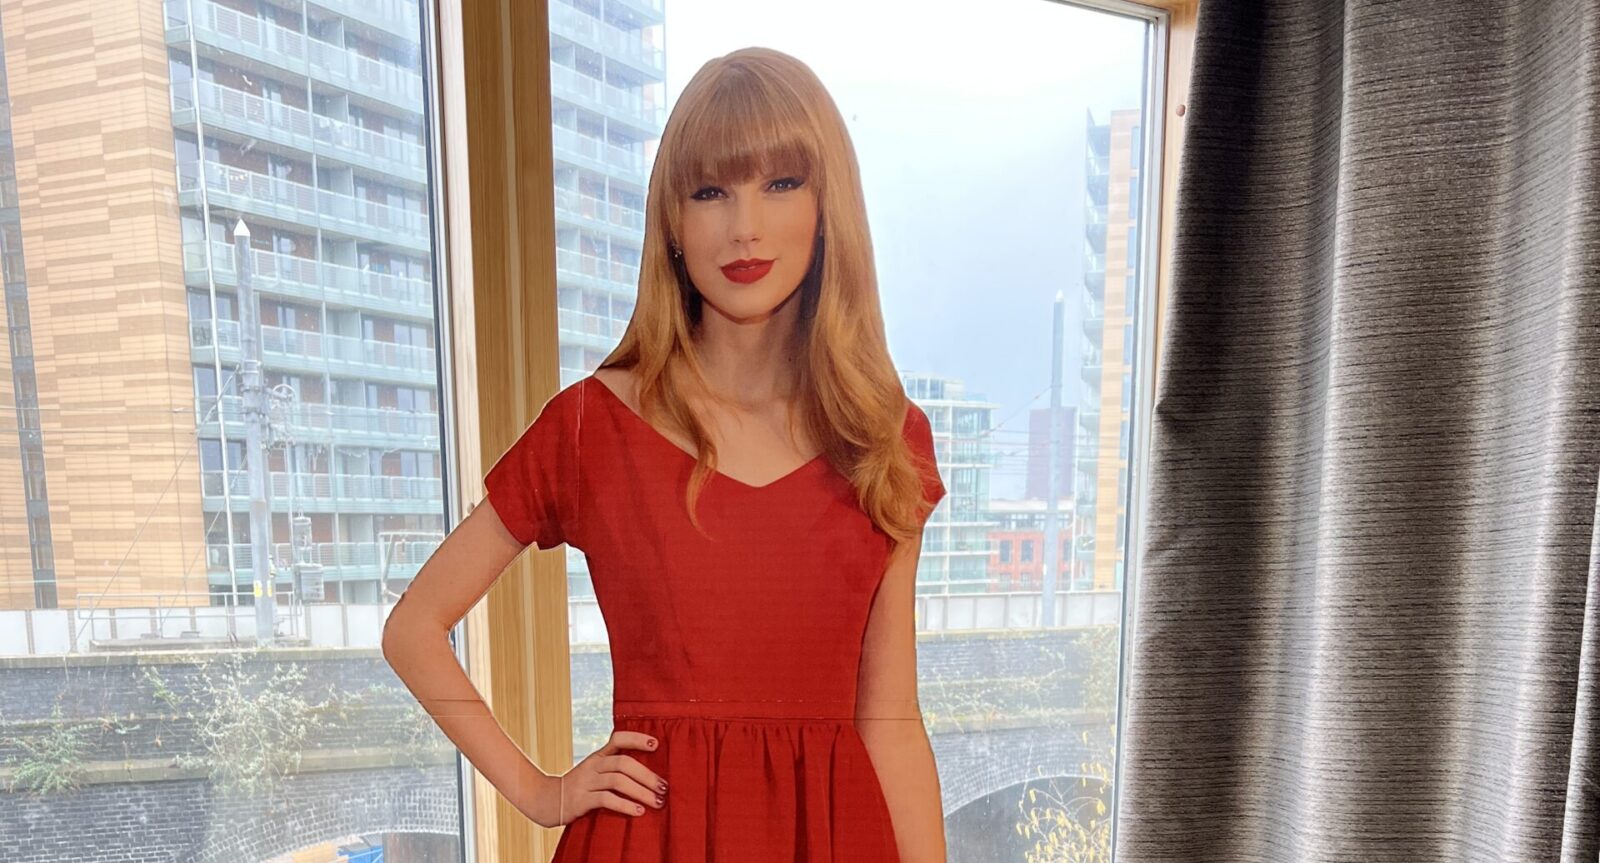 Taylor Swift cardboard cutout to be auctioned for Brianna Ghey